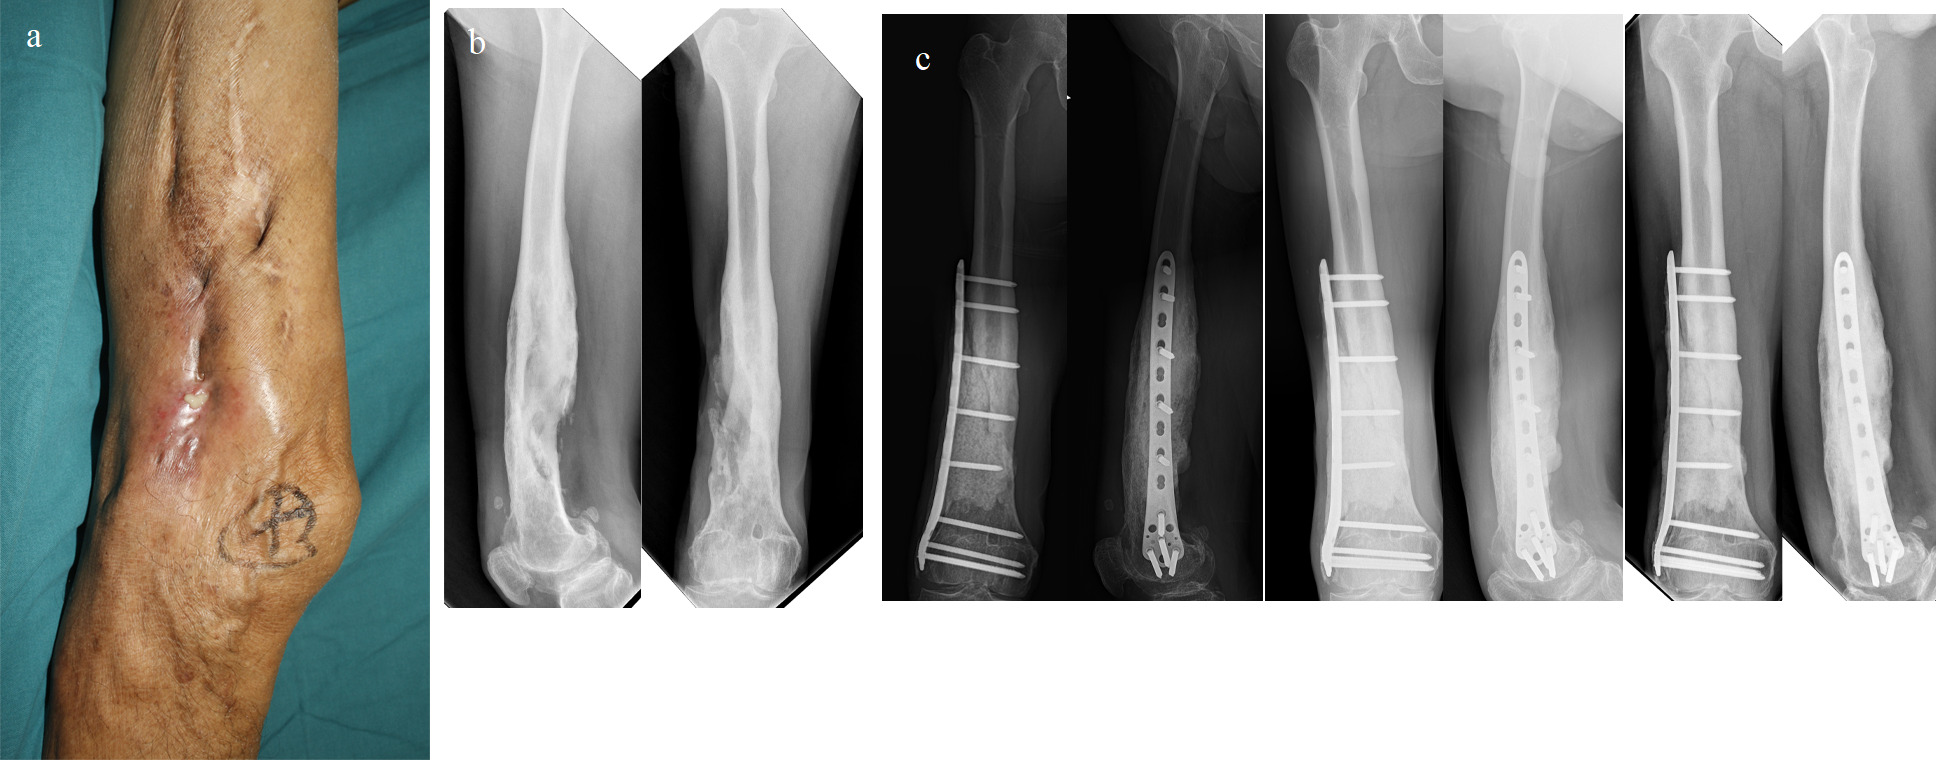 Fig. 2 
            Successful management of a 72-year-old male osteomyelitis patient in distal femur with an antibiotic‐loaded cement spacer (ALCS) for definitive treatment. a) Photograph presenting a sinus in distal, lateral side of the thigh. b) Anteroposterior and lateral radiographs before debridement. c) Radiographs of three, 12, and 24 months after an ALCS for definitive treatment, where the implants and cement spacer were in place with no excessive bone loss.
          